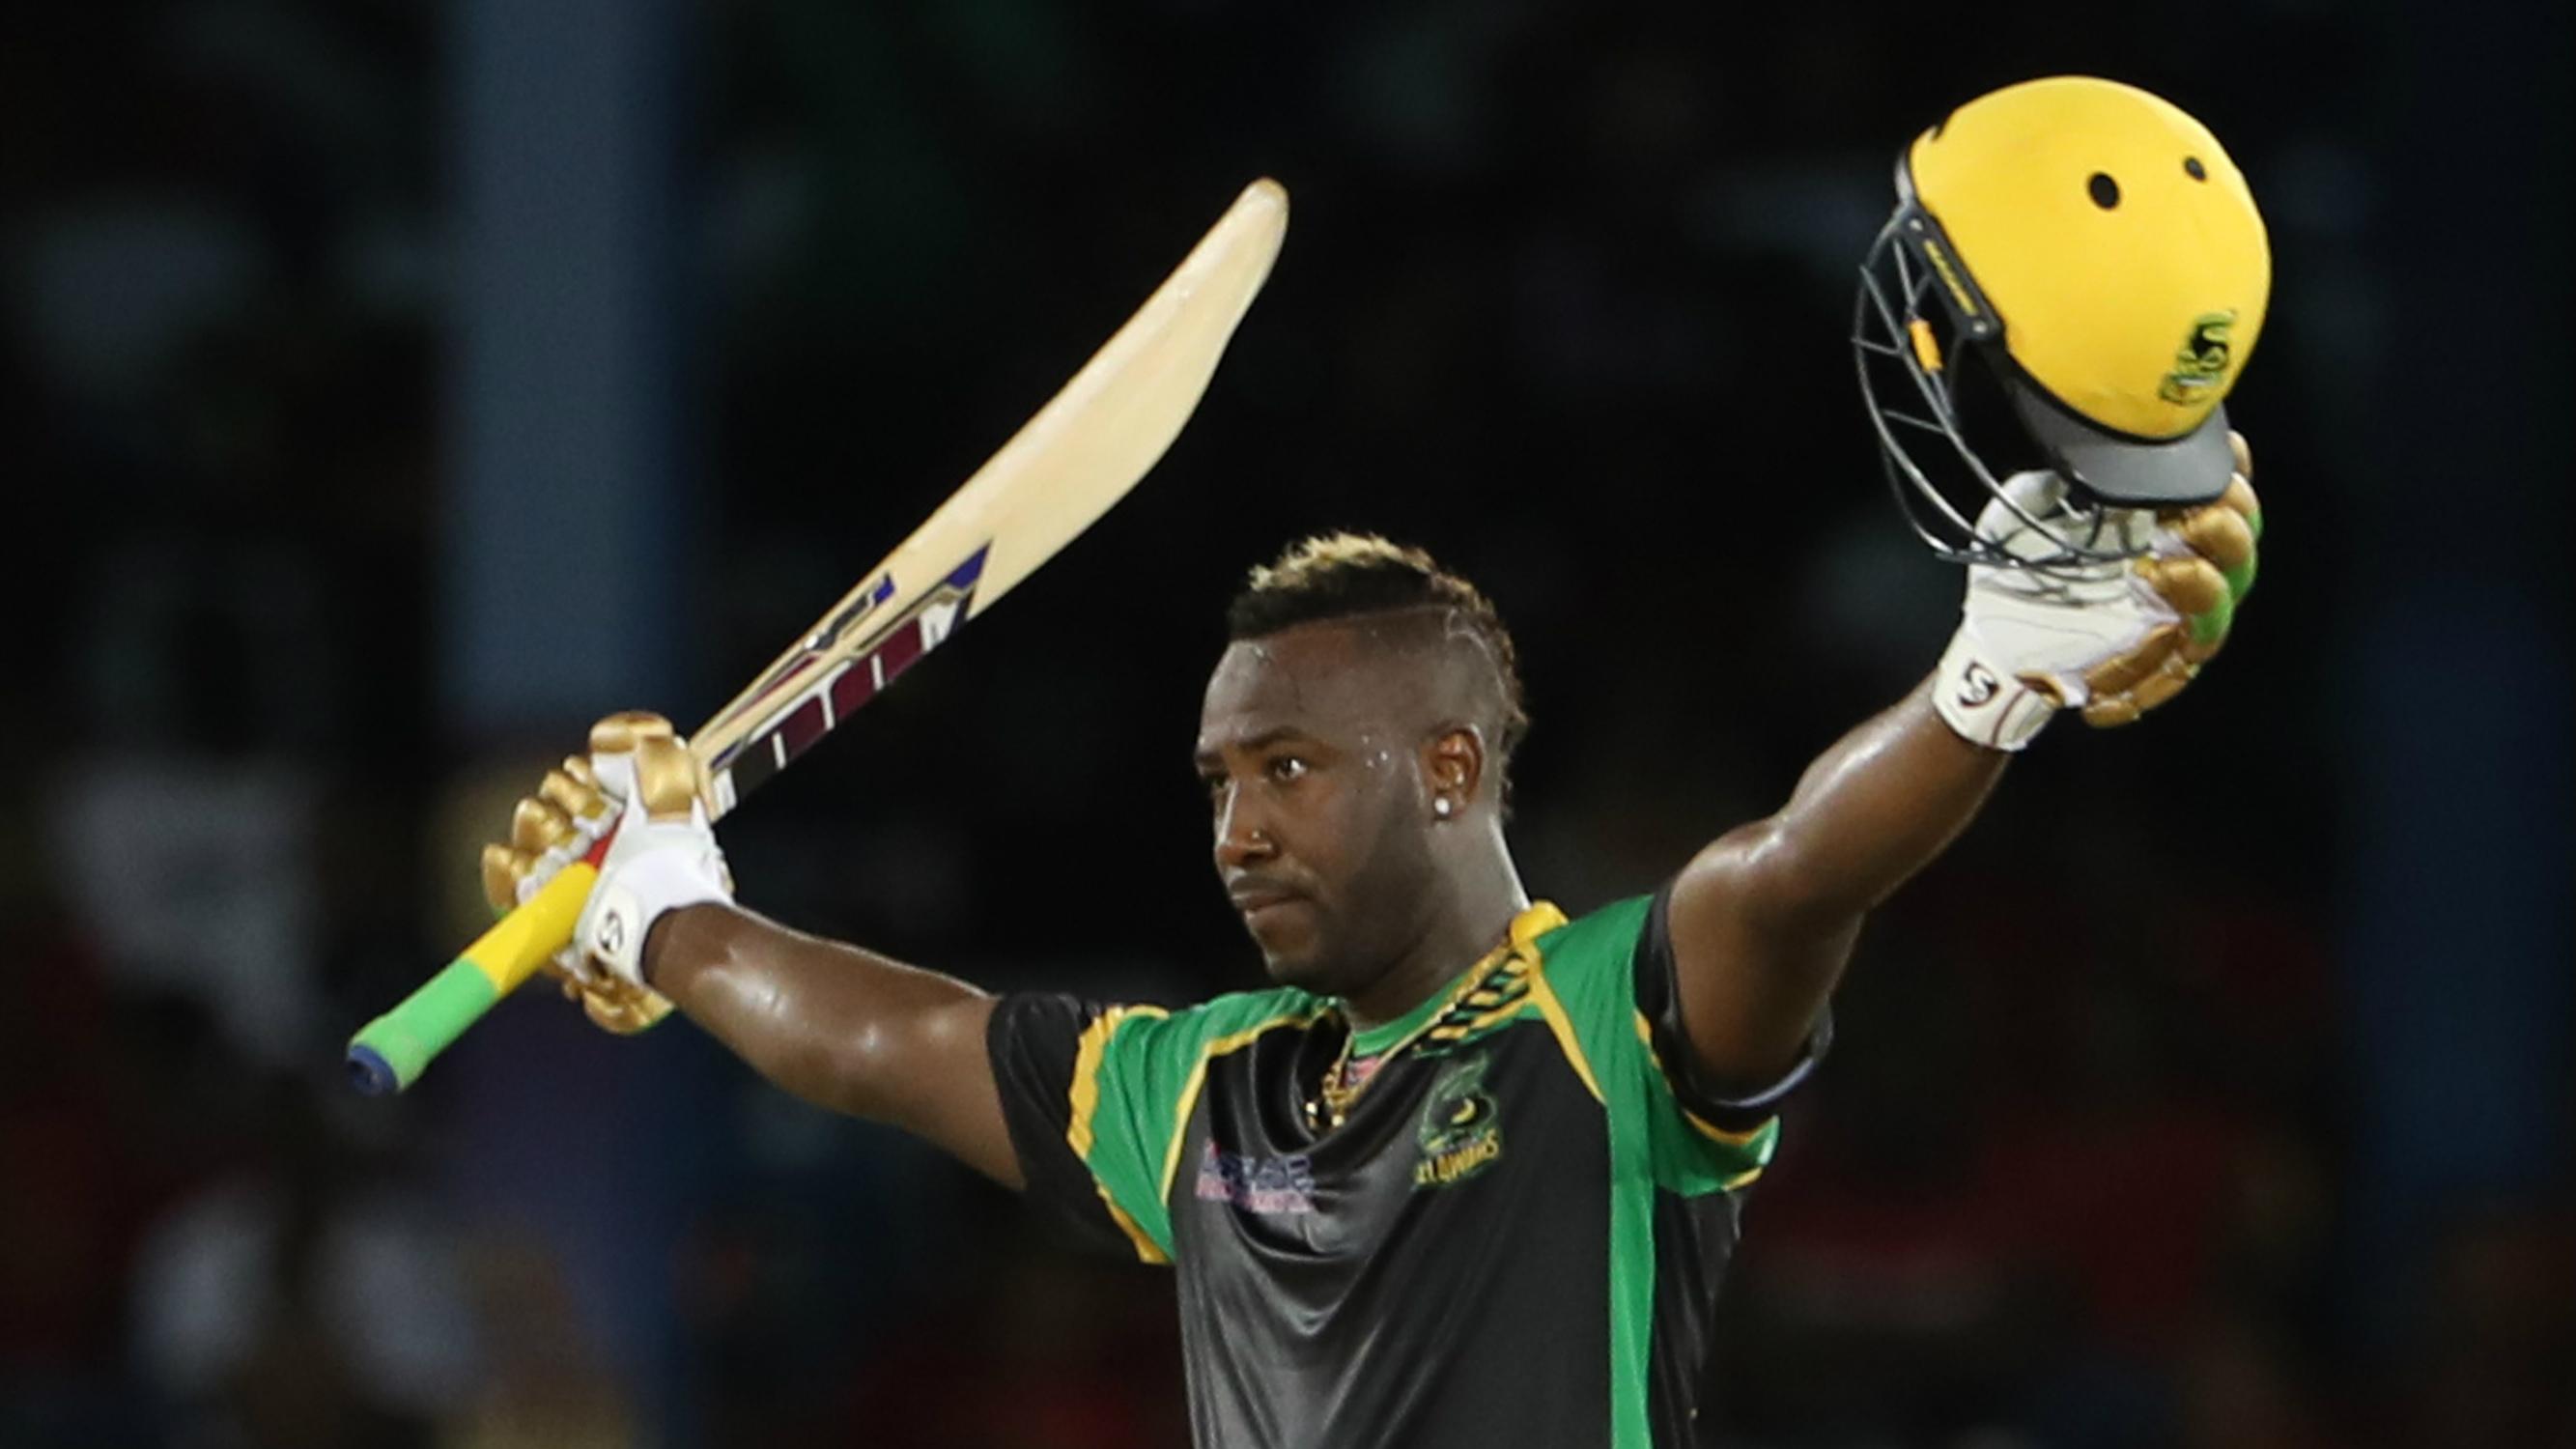 Andre Russell | CPL Twitter